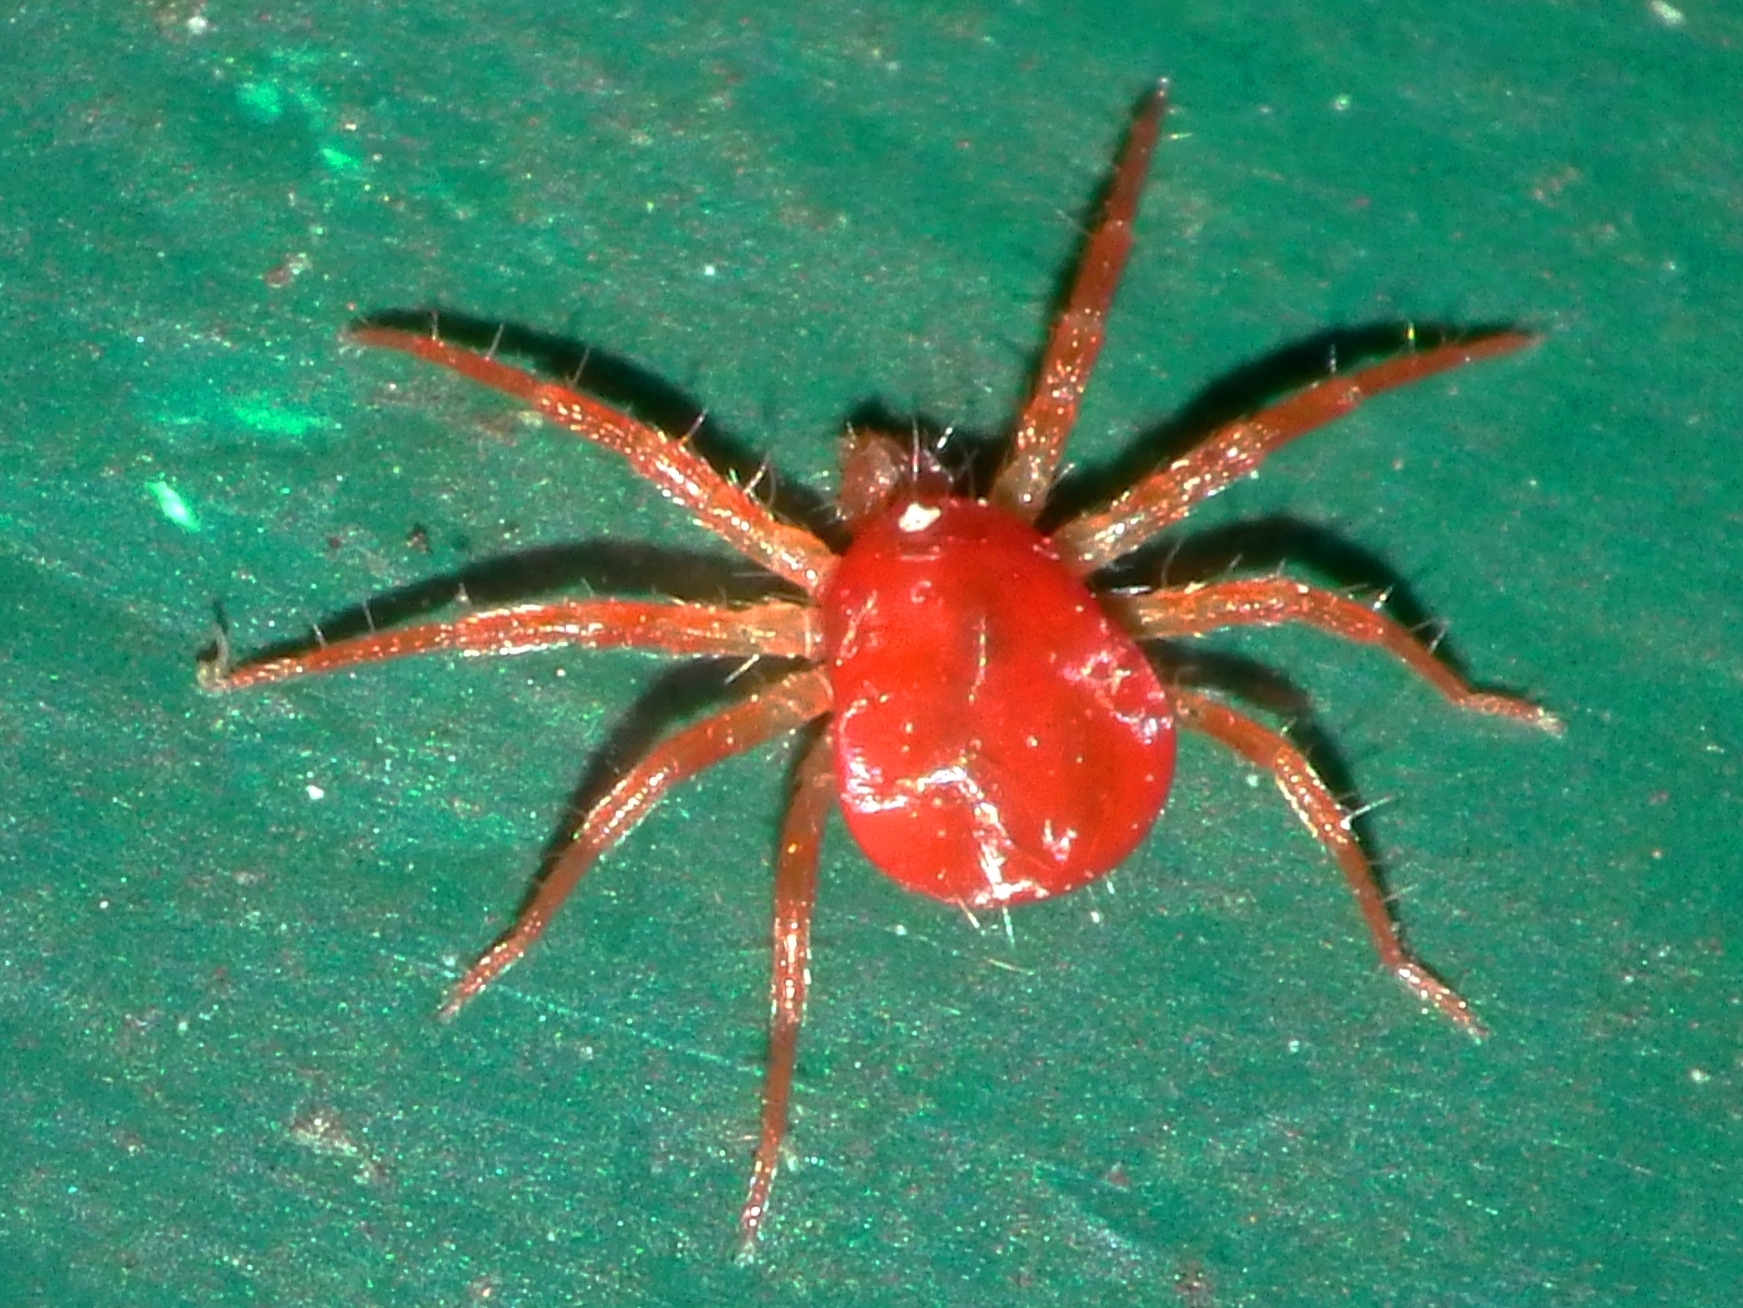 File:Red Spider Mite.jpg - Wikimedia Commons